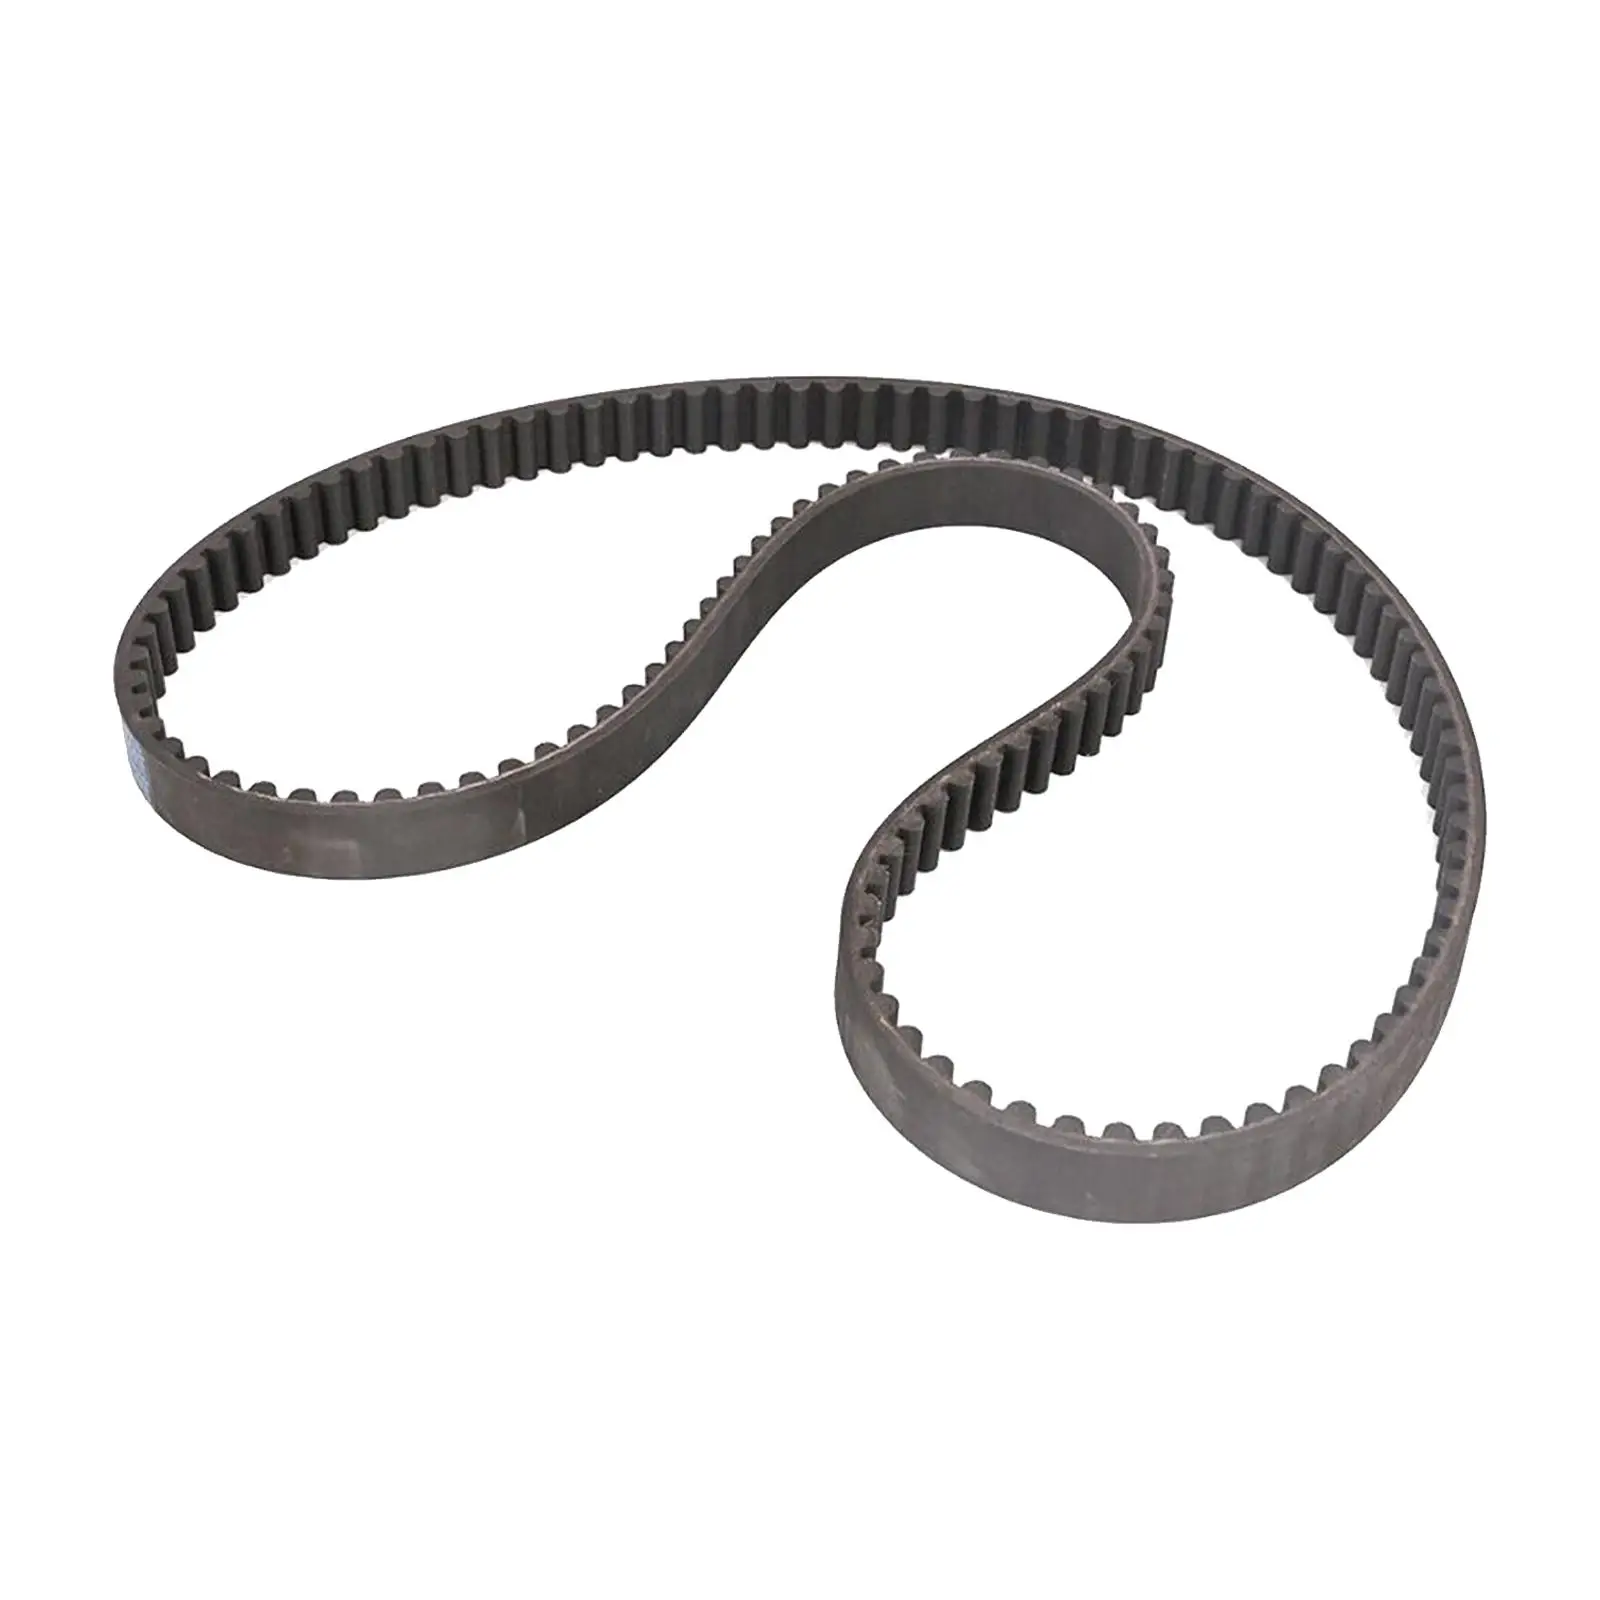 

Rear Drive Belt 1204-0043 Rubber 58-416 1 1/2" 40017-94 130 Tooth for Harley Flst Softail Fxst Fxstc Direct Replacement Durable